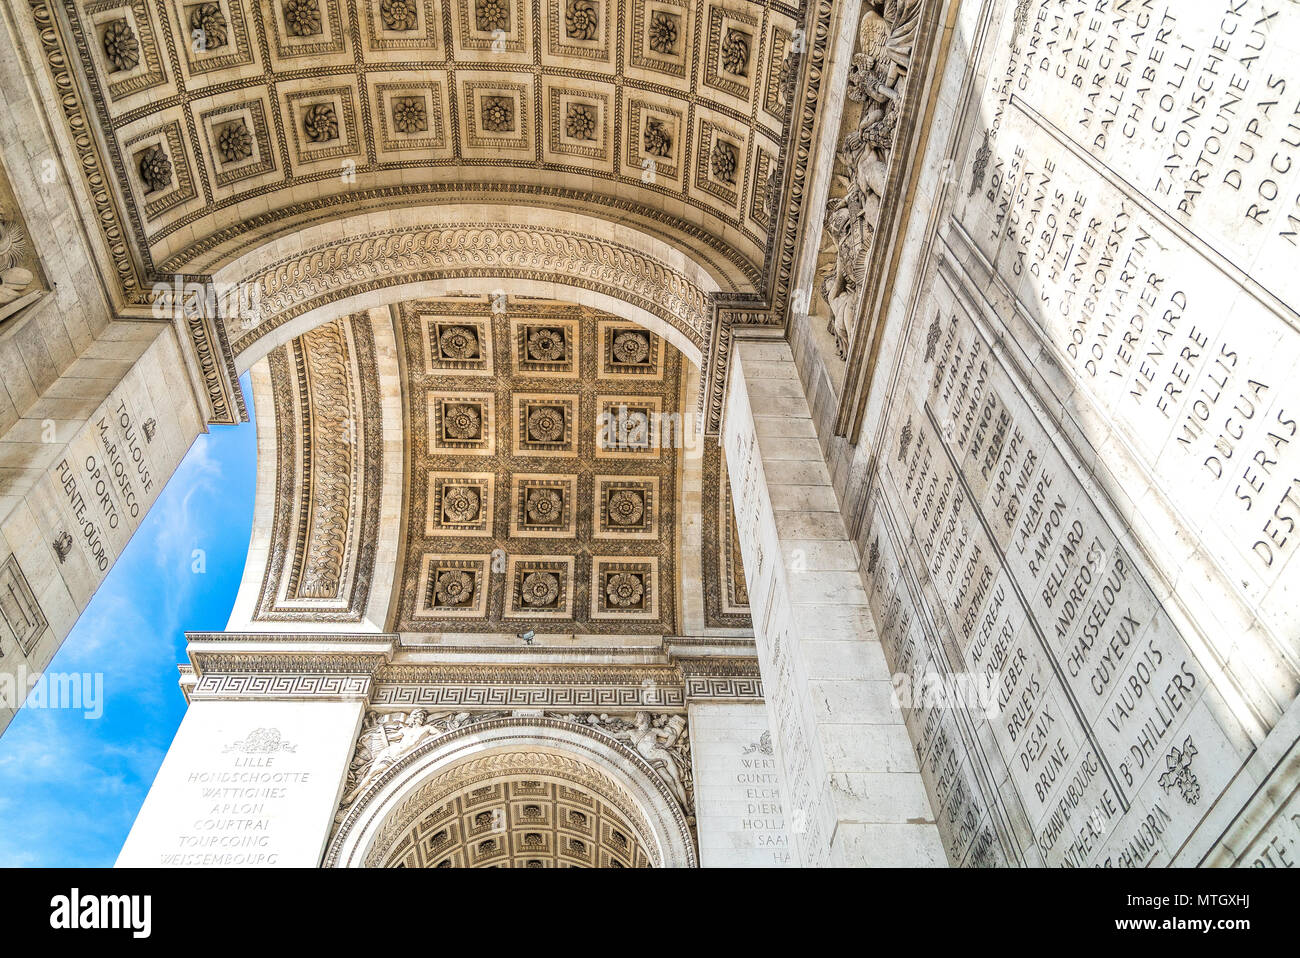 The roof of the Arc de Triomphe in Paris showing the 21 sculpted roses in the ceiling Stock Photo